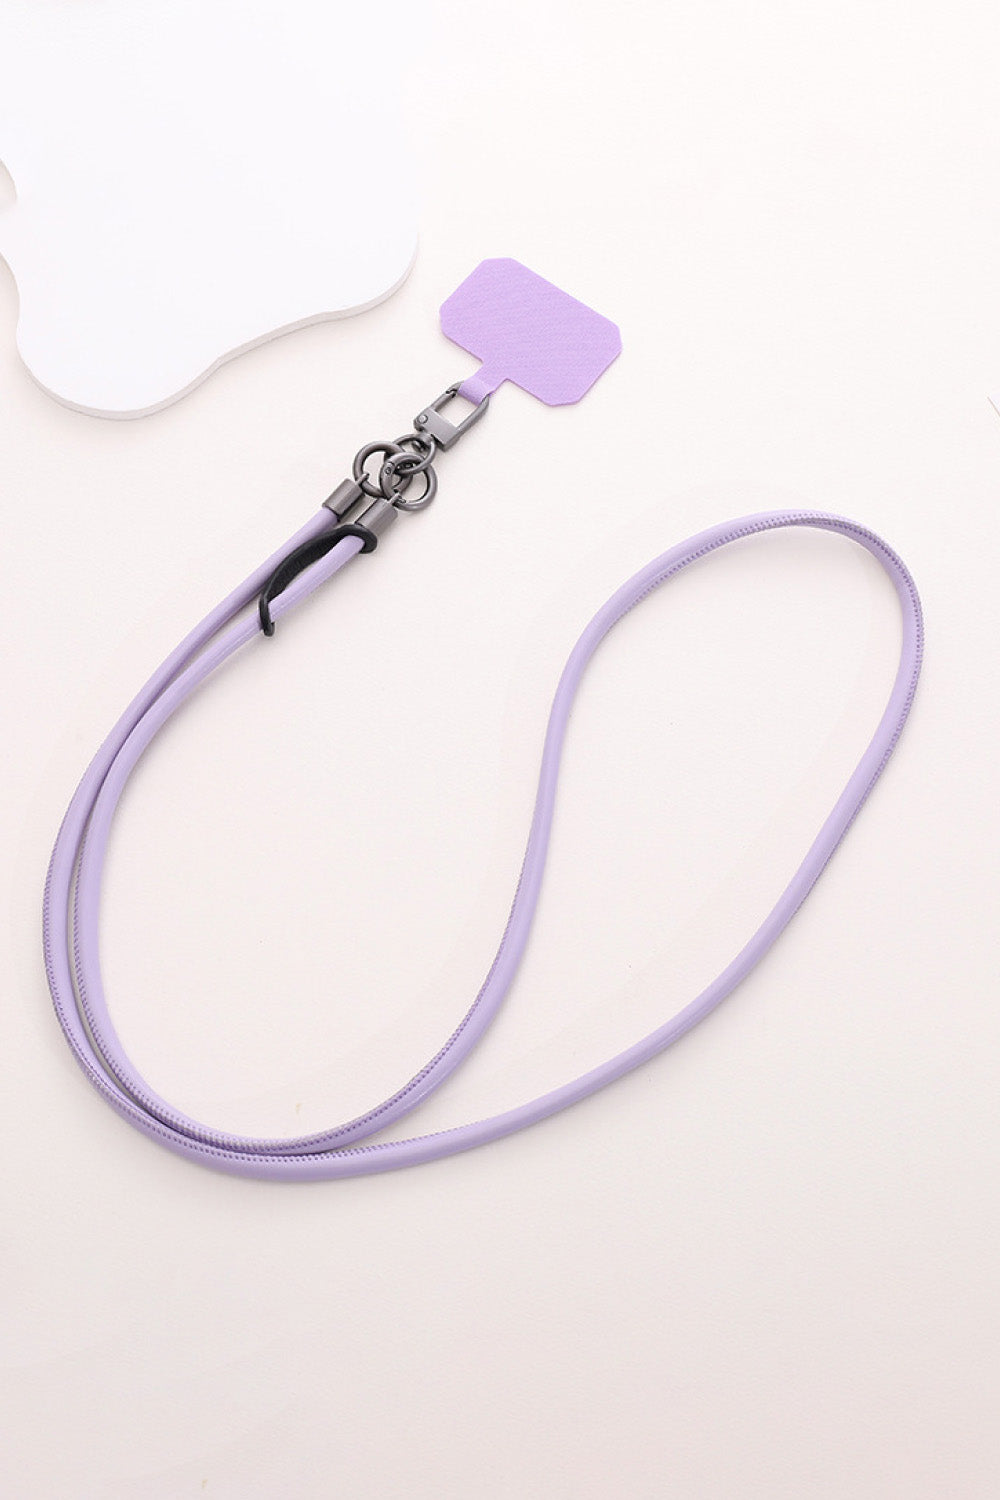 Trendsi Cupid Beauty Supplies Lavender / One Size Keychains PU Phone Lanyard